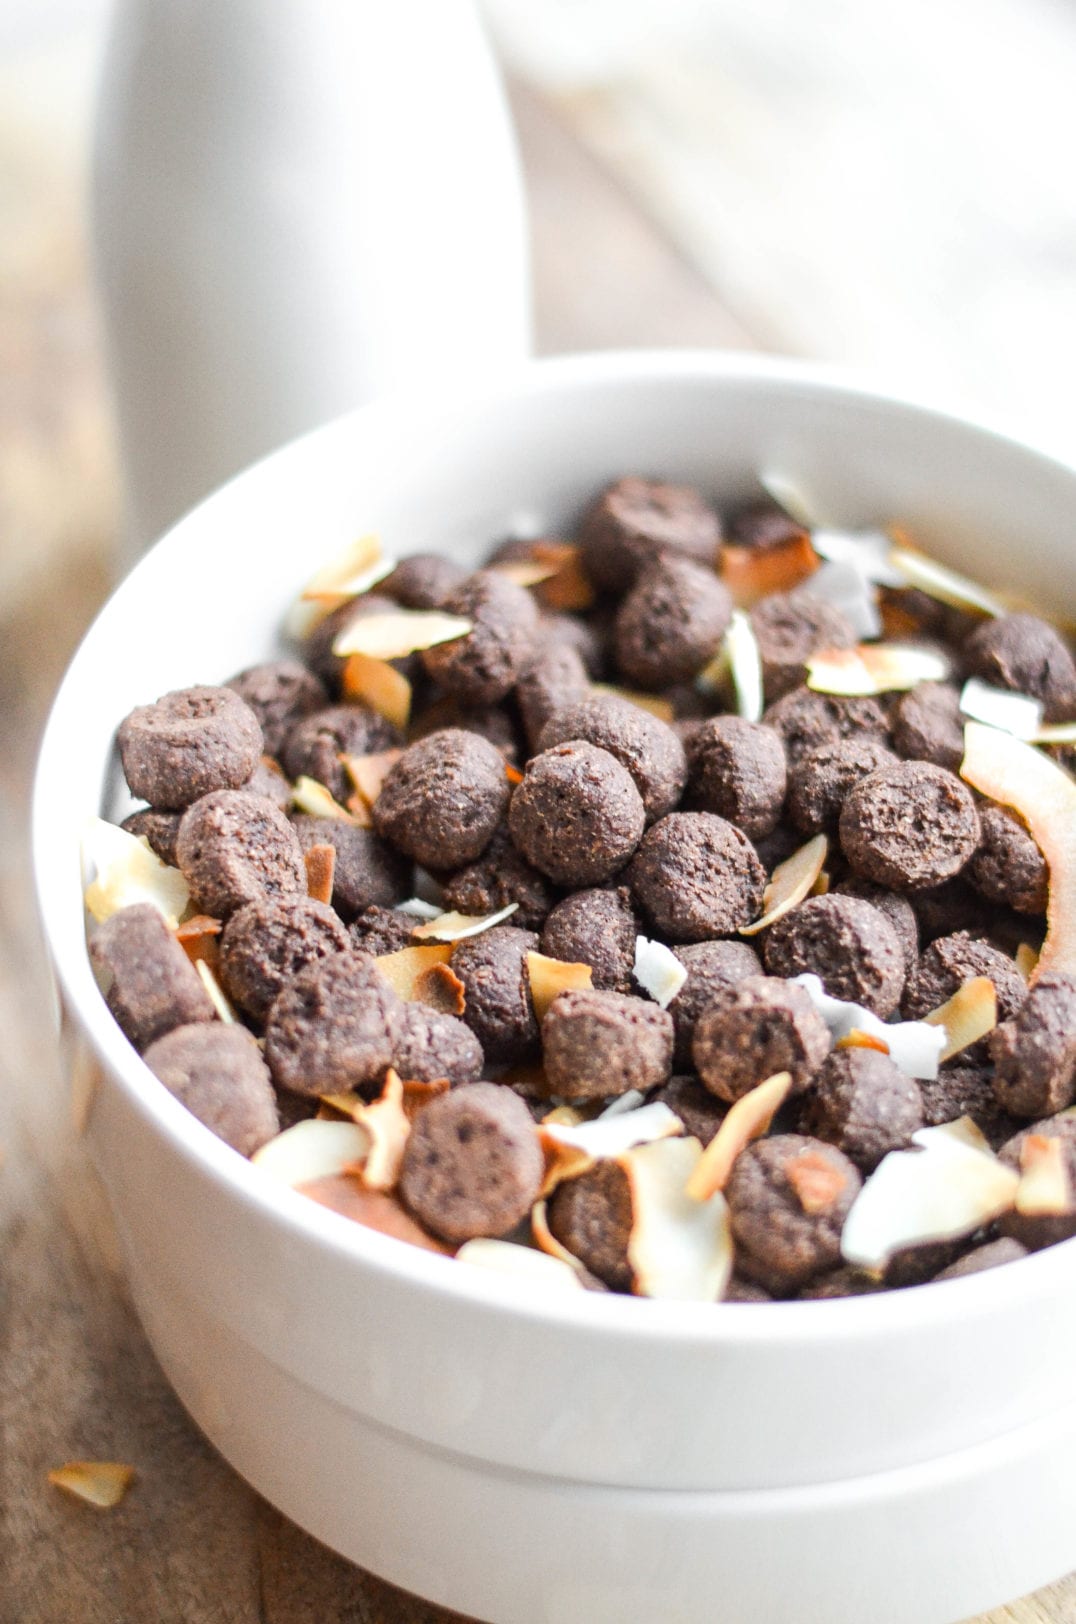 Whole Wheat Chocolate Coconut Cereal